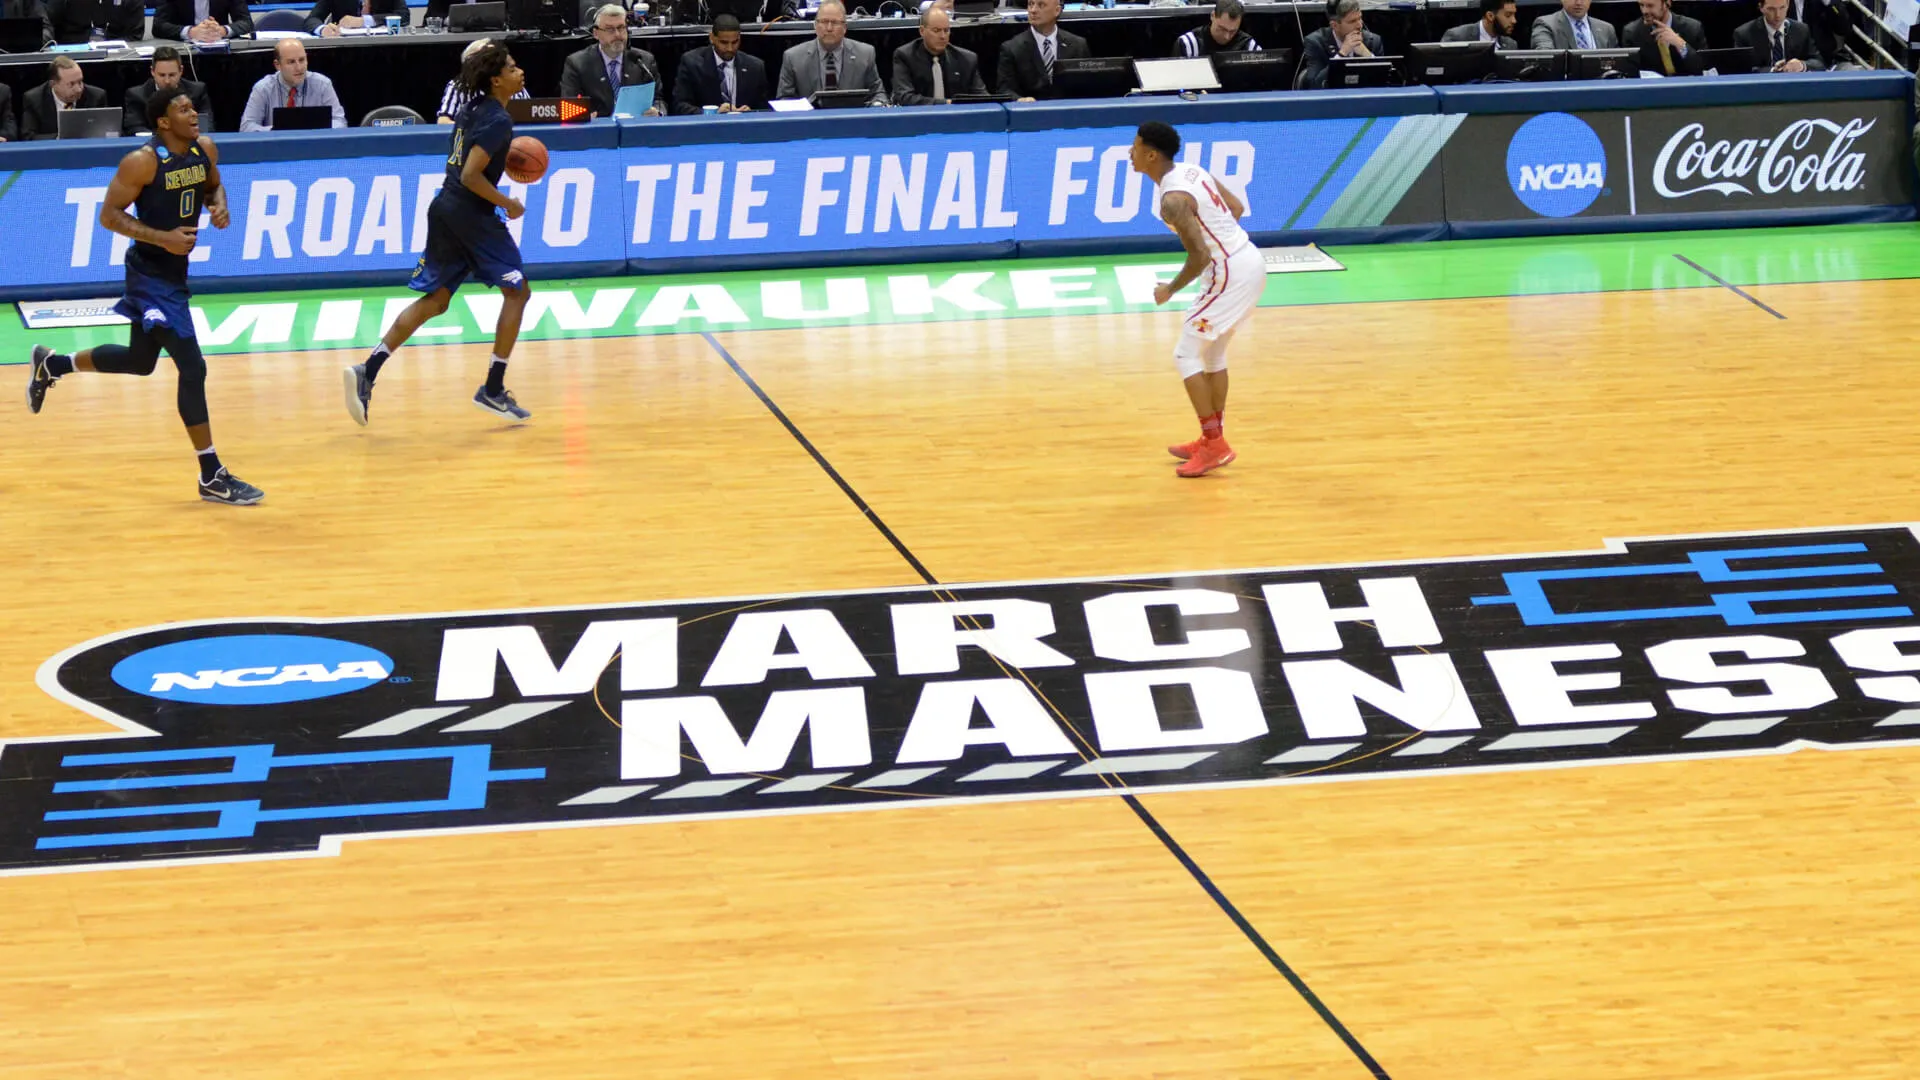 March Madness logo on basketball court